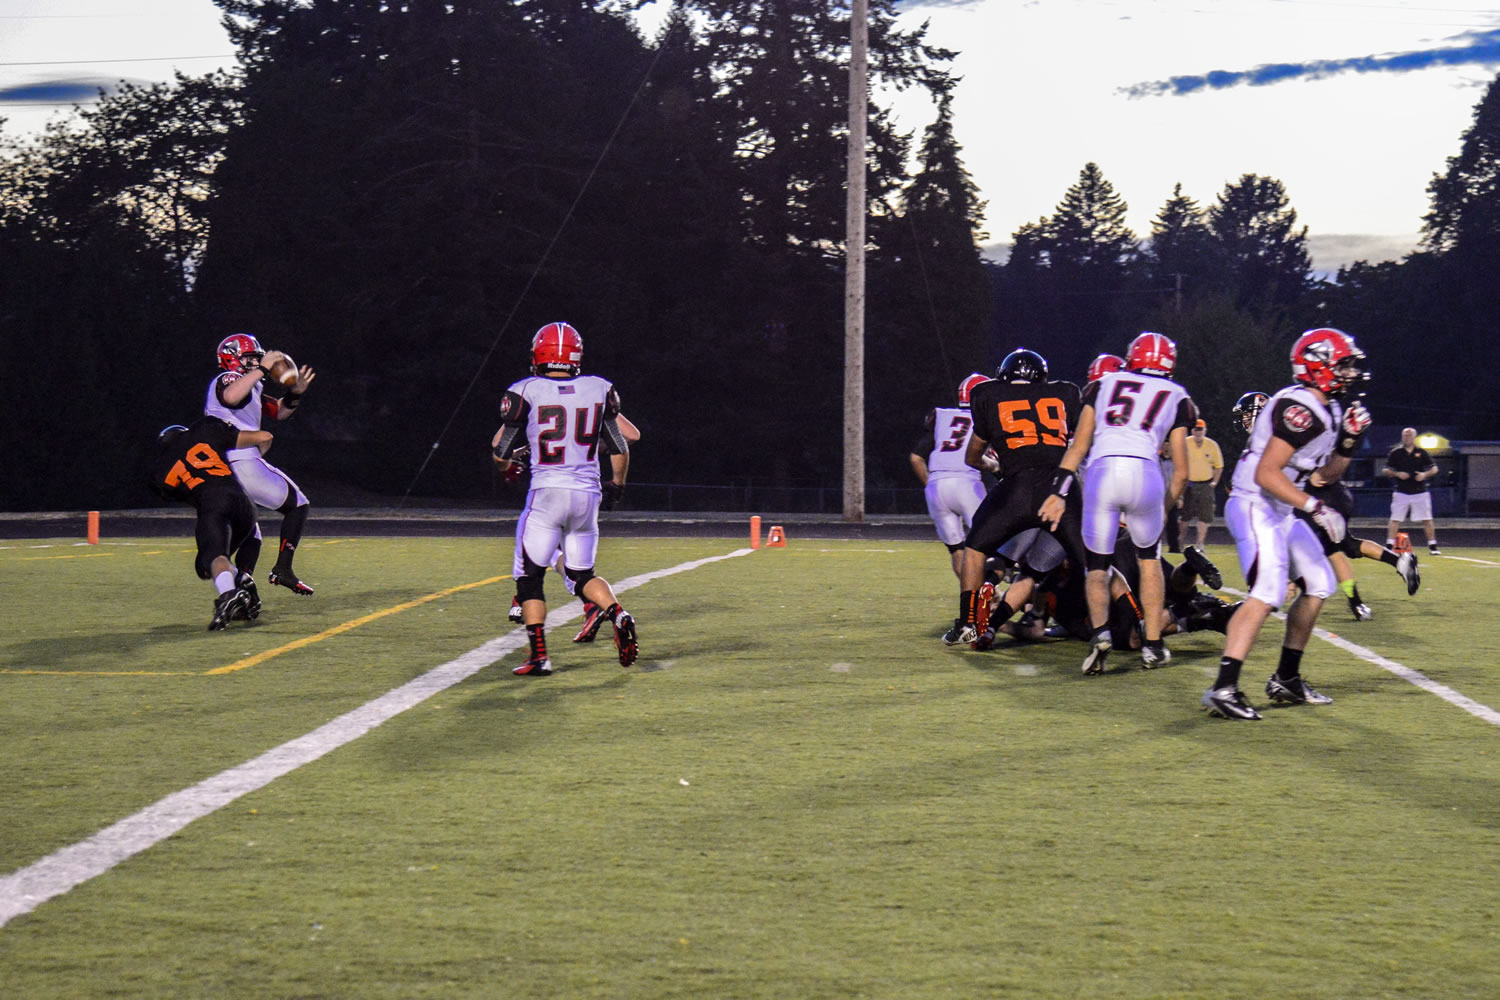 Washougal defensive lineman Caleb Economides blind sides R.A. Long quarterback Ryan Peerboom in the end zone to give the Panthers two points on a safety.